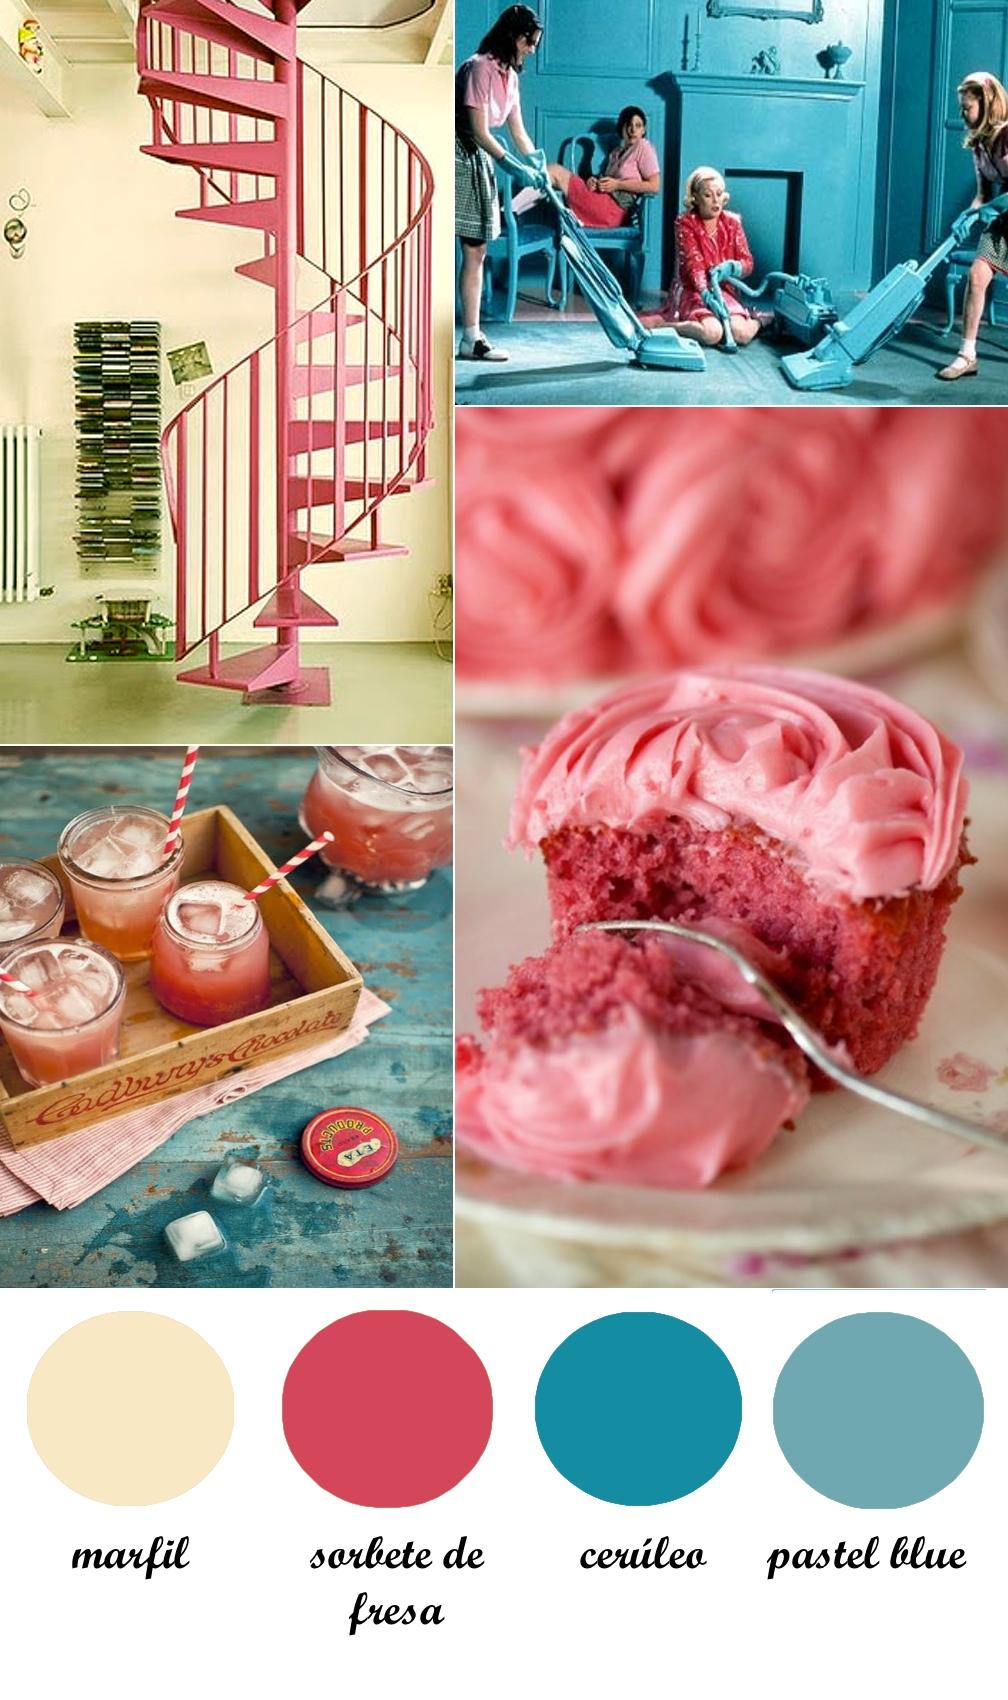 Colourboard 25. Azul y rosa/Blue and pink